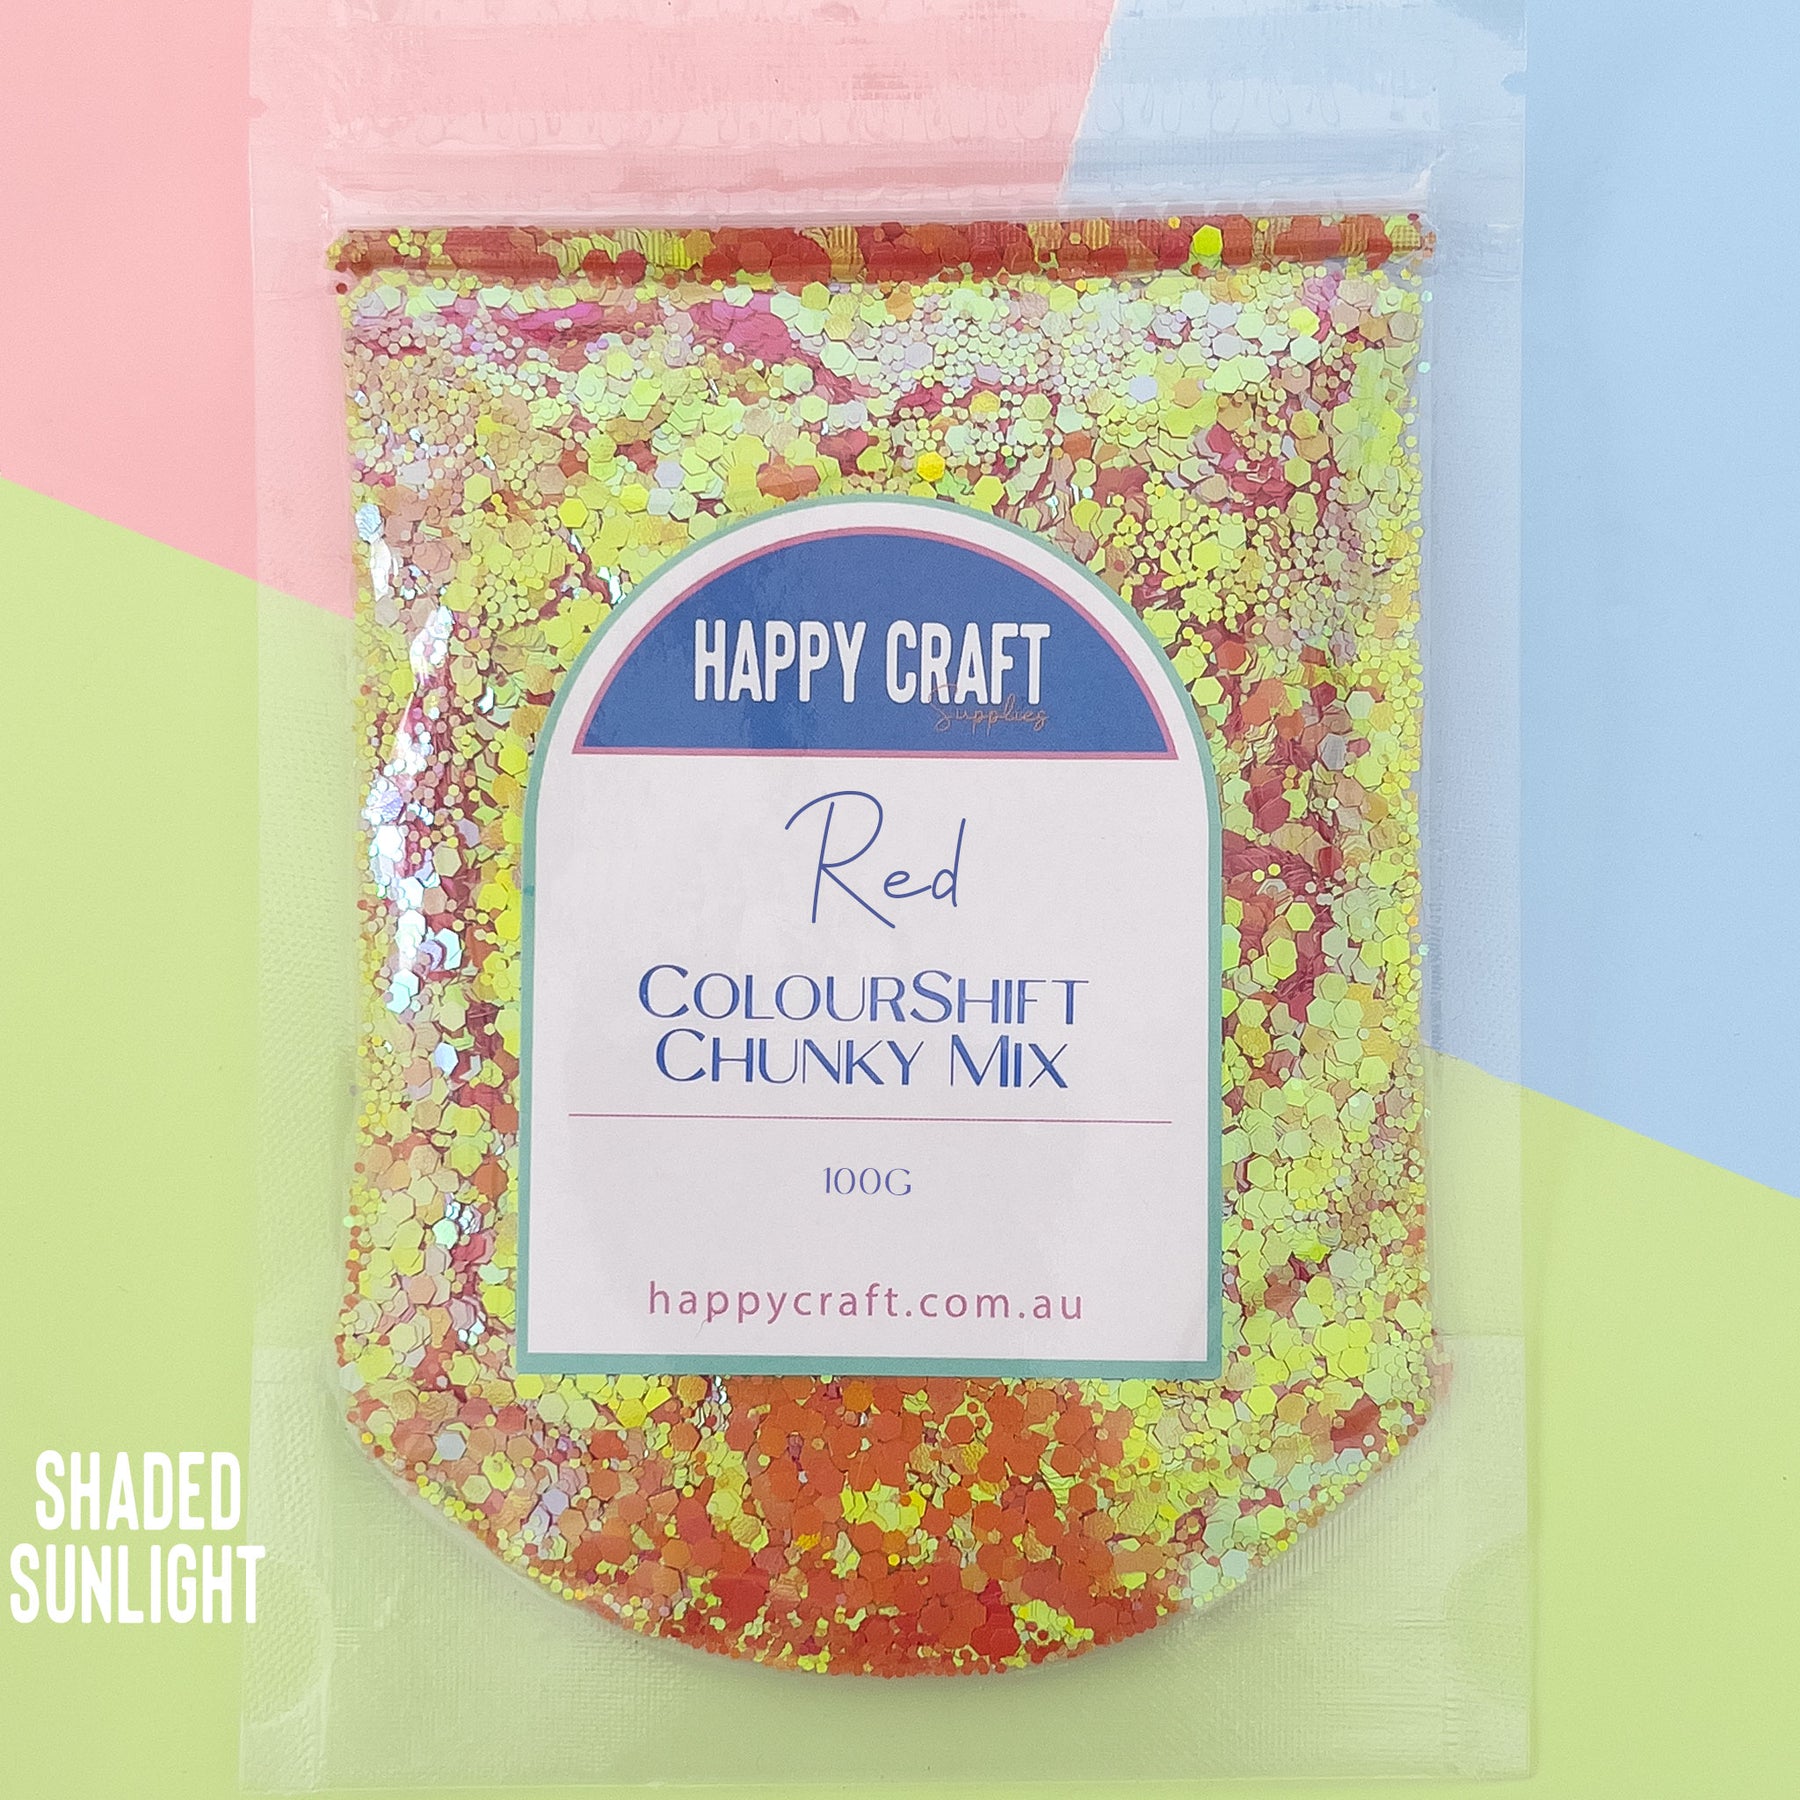 Chunky Glitter Colour Shift Mix - Red